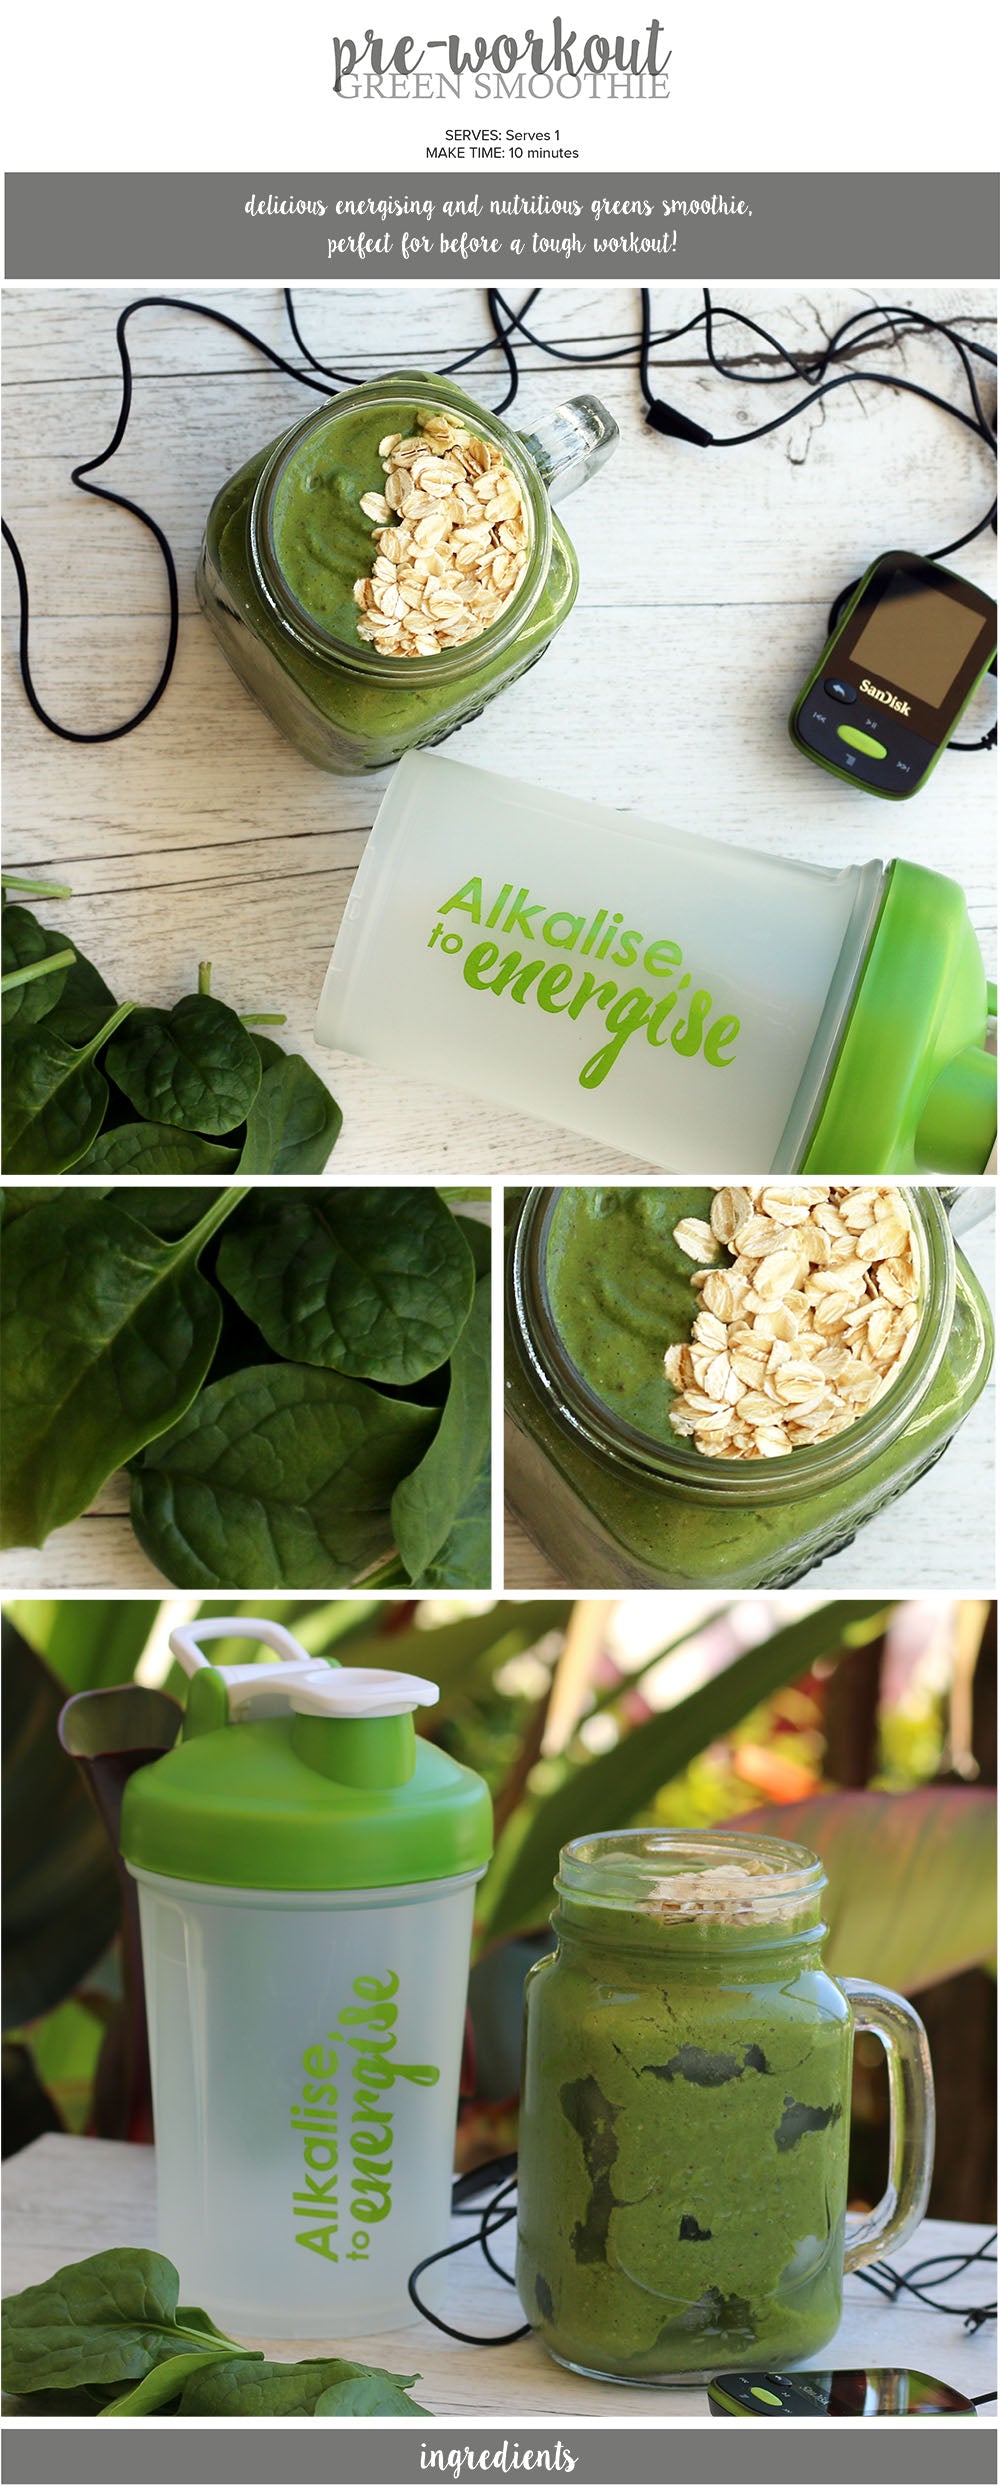 Pre Workout Green Smoothie Recipe